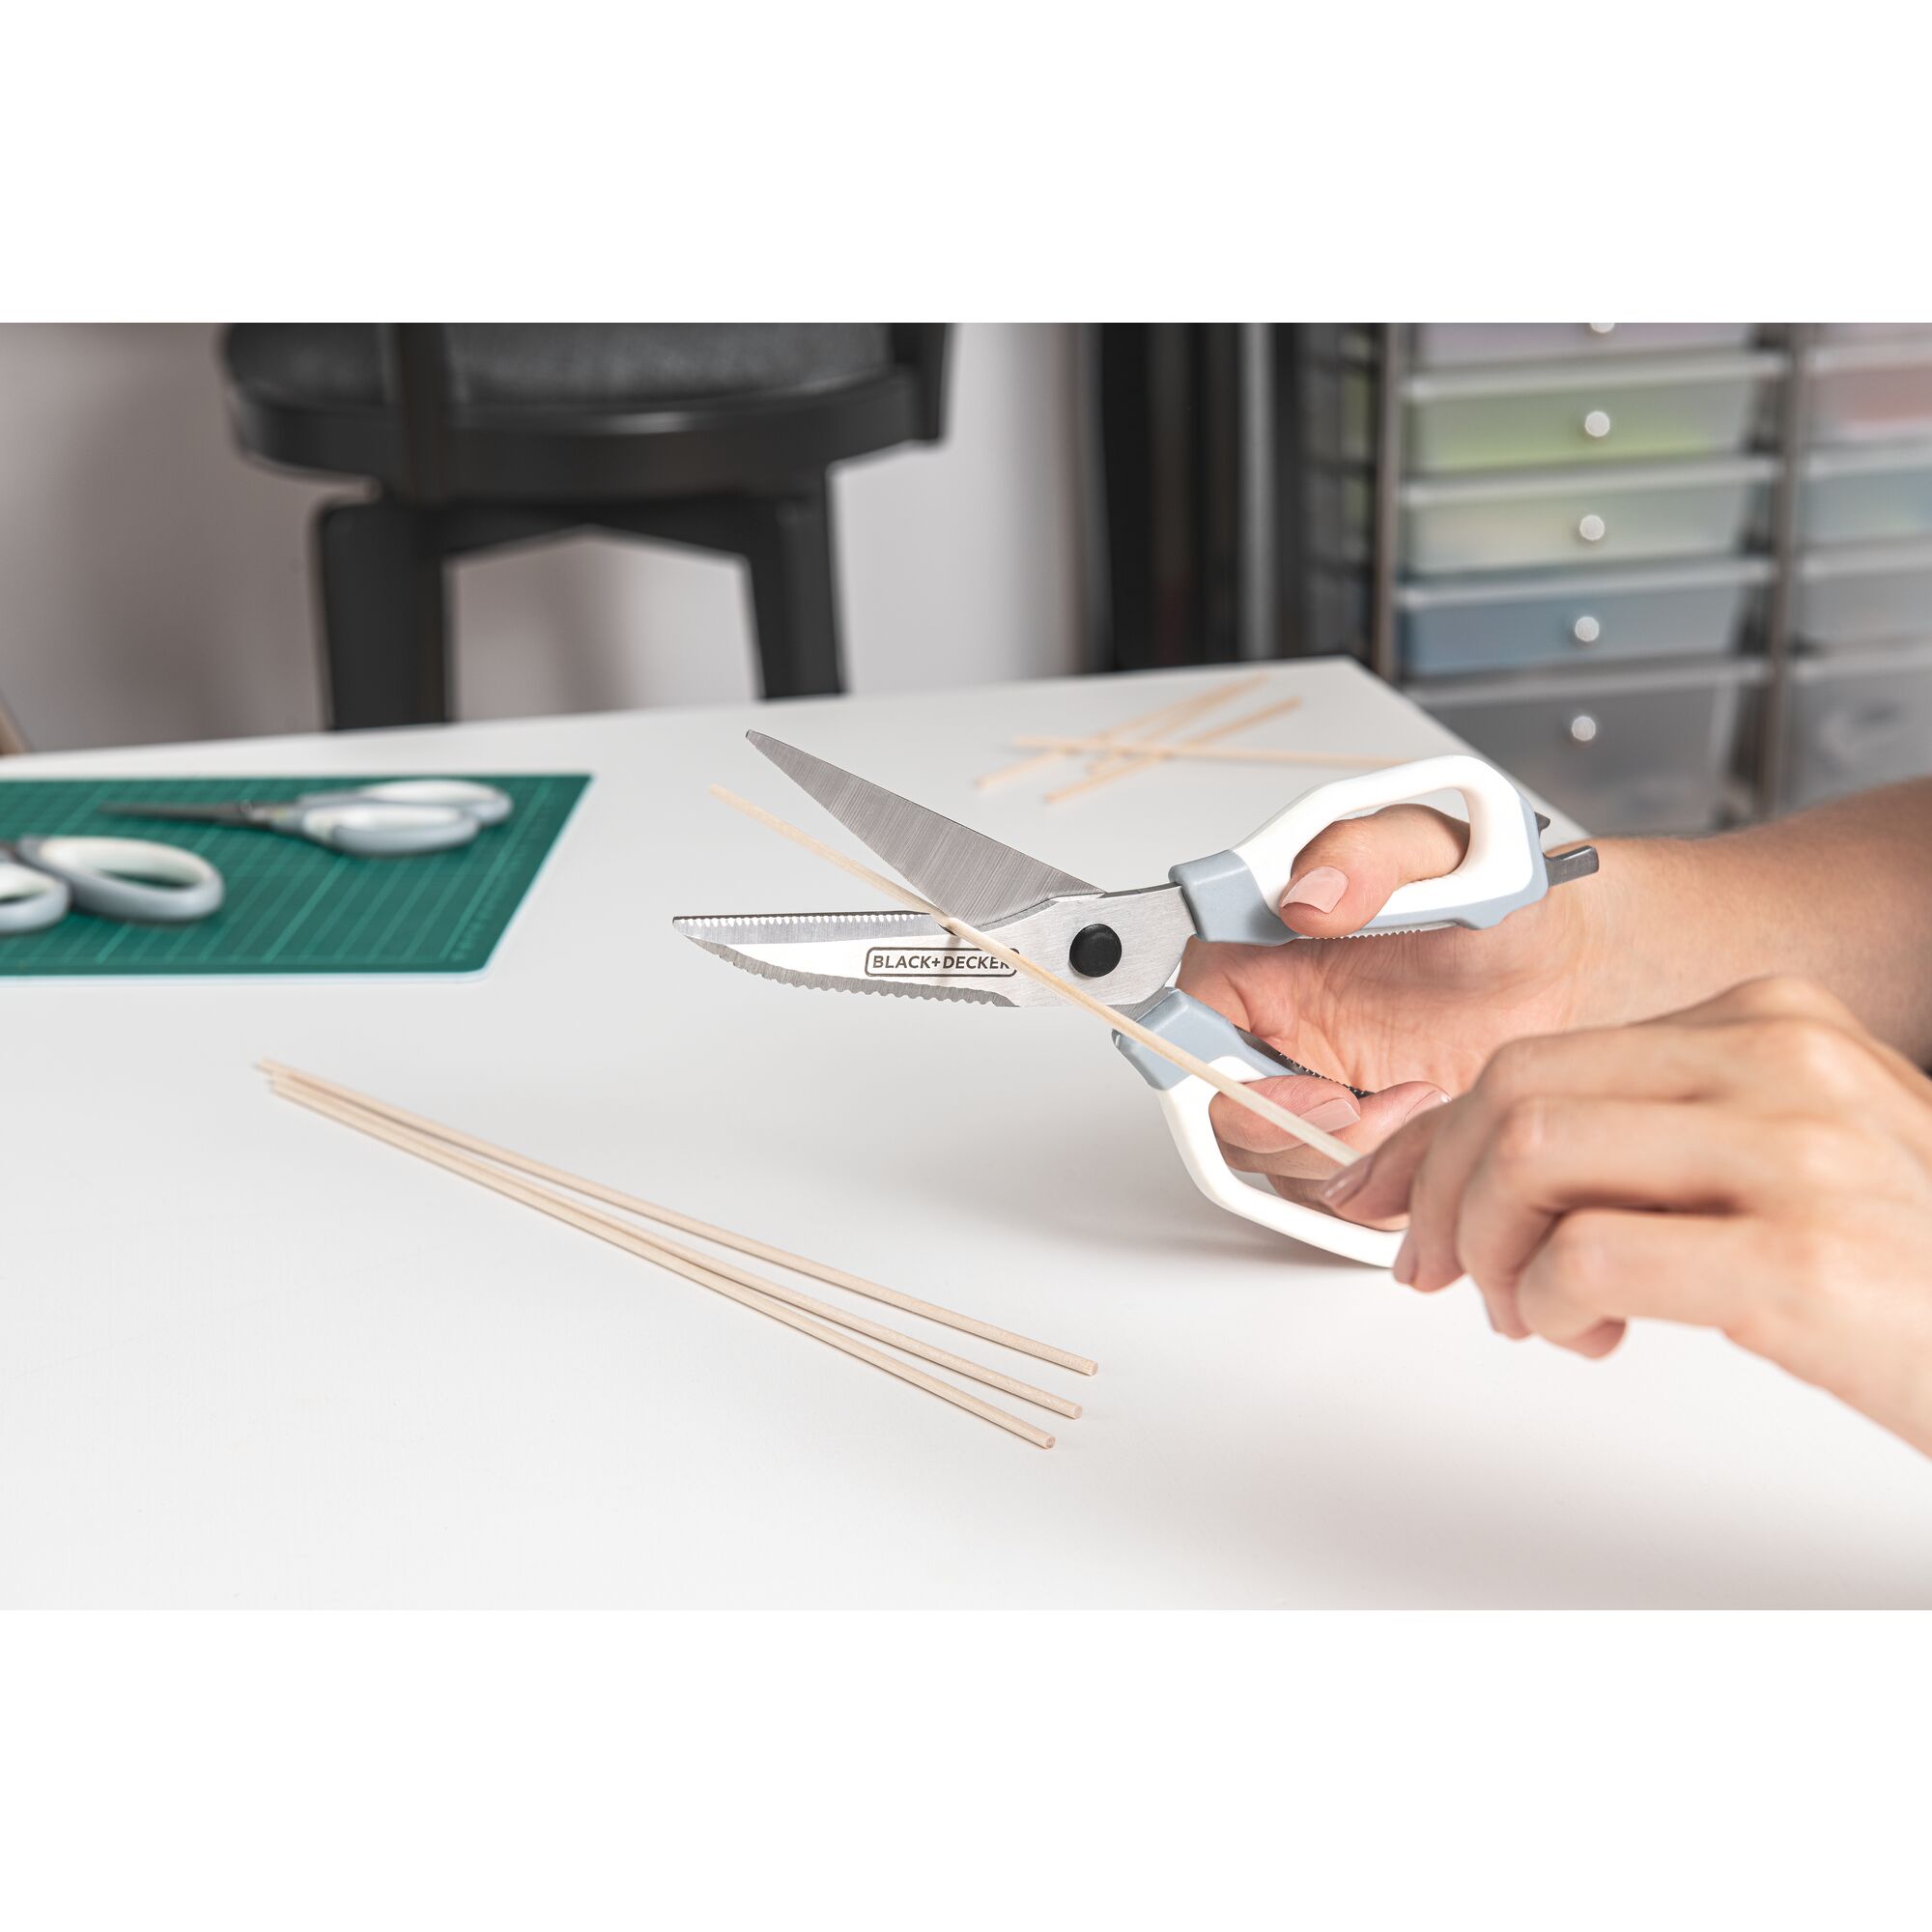 BLACK+DECKER crafting shears being used to cut 1/8-in. wooden dowel in a crafting room